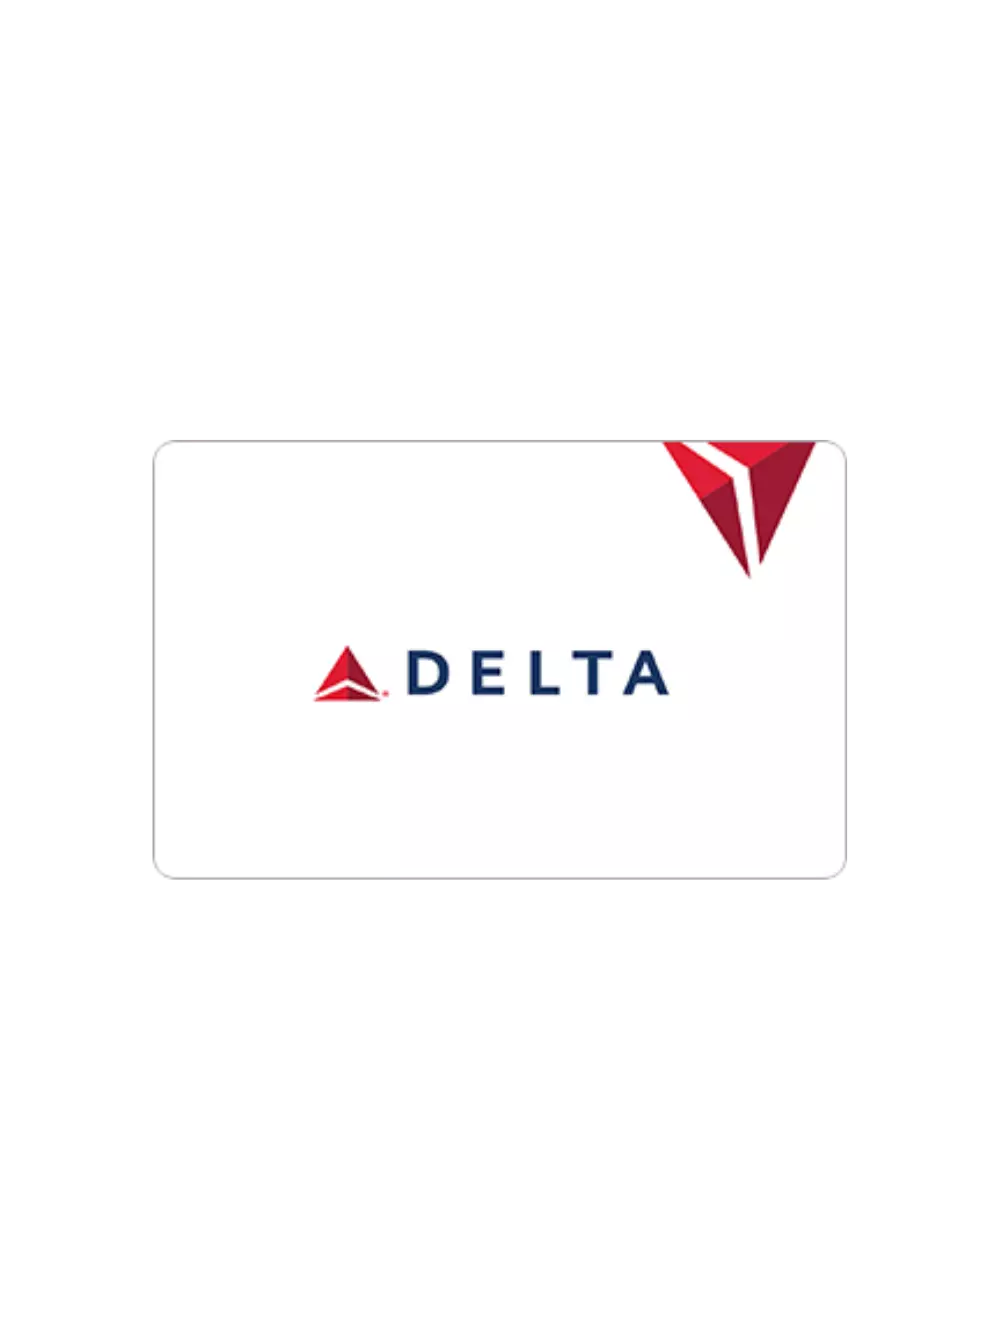 Delta Air Lines Scams Promise '$500 Gift Card for $1' and '$100 Reward' |  Snopes.com